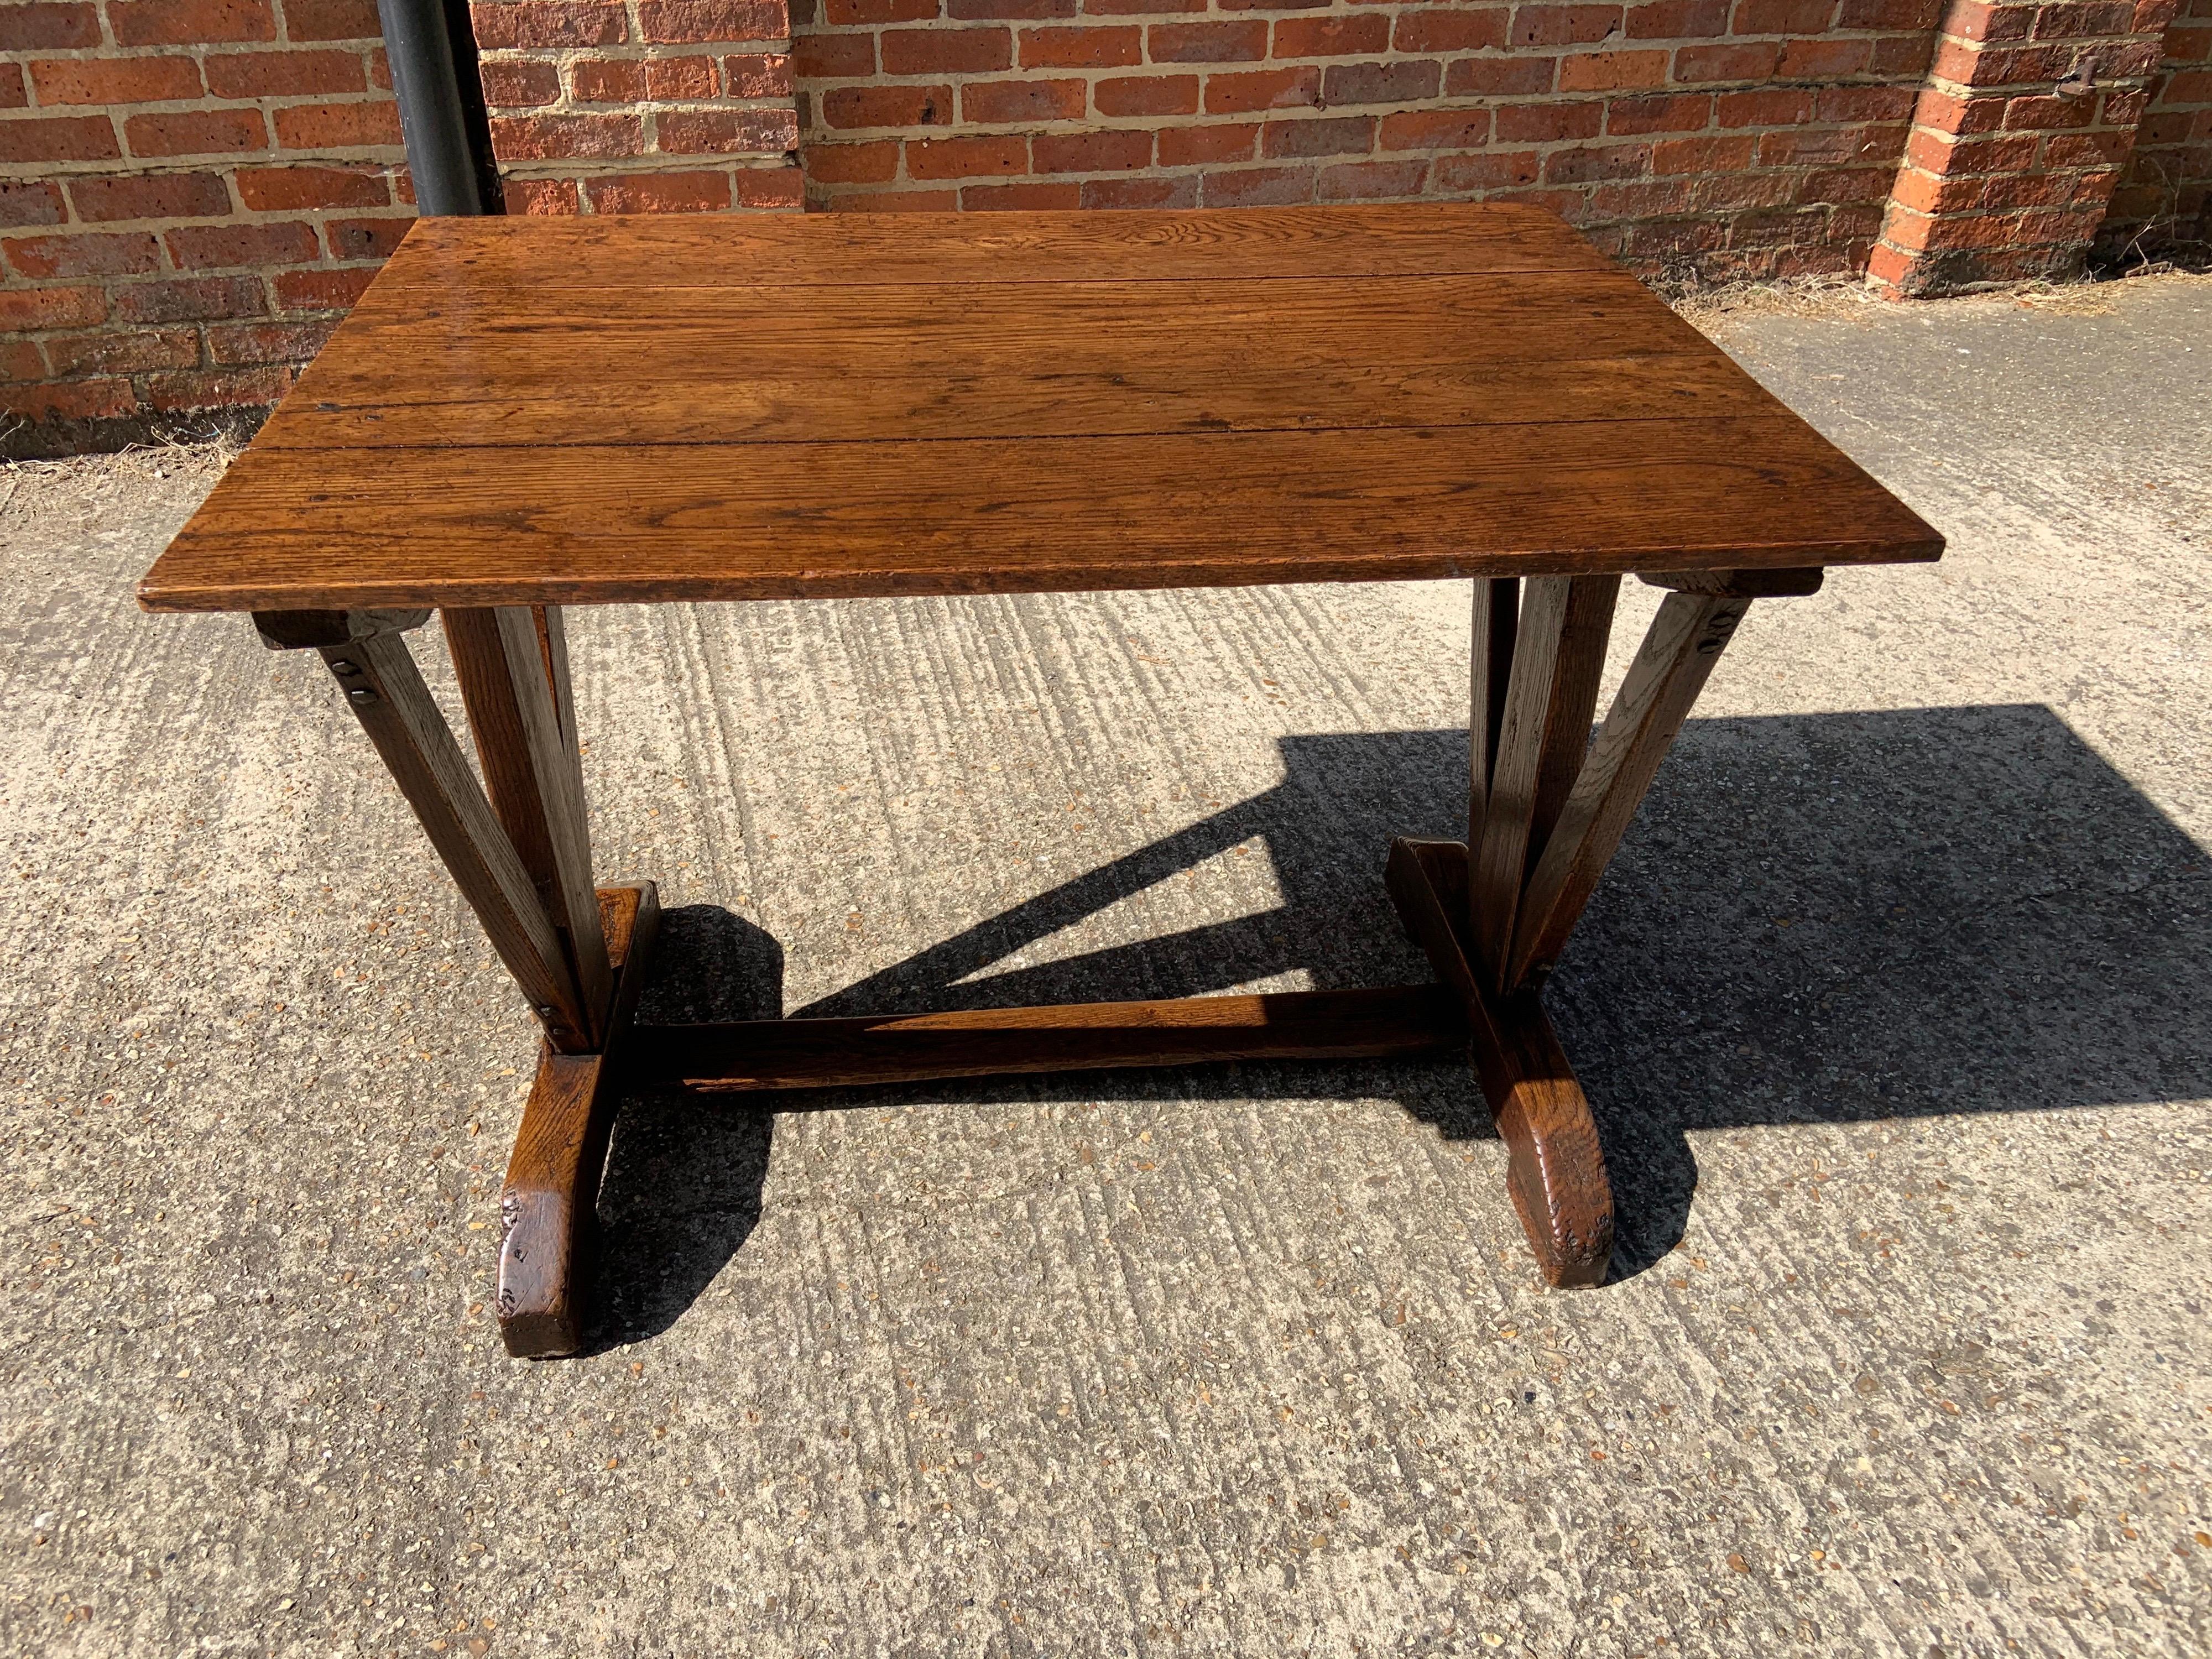 19th Century Antique Oak Trestle Table with Two Half Moon Leaves